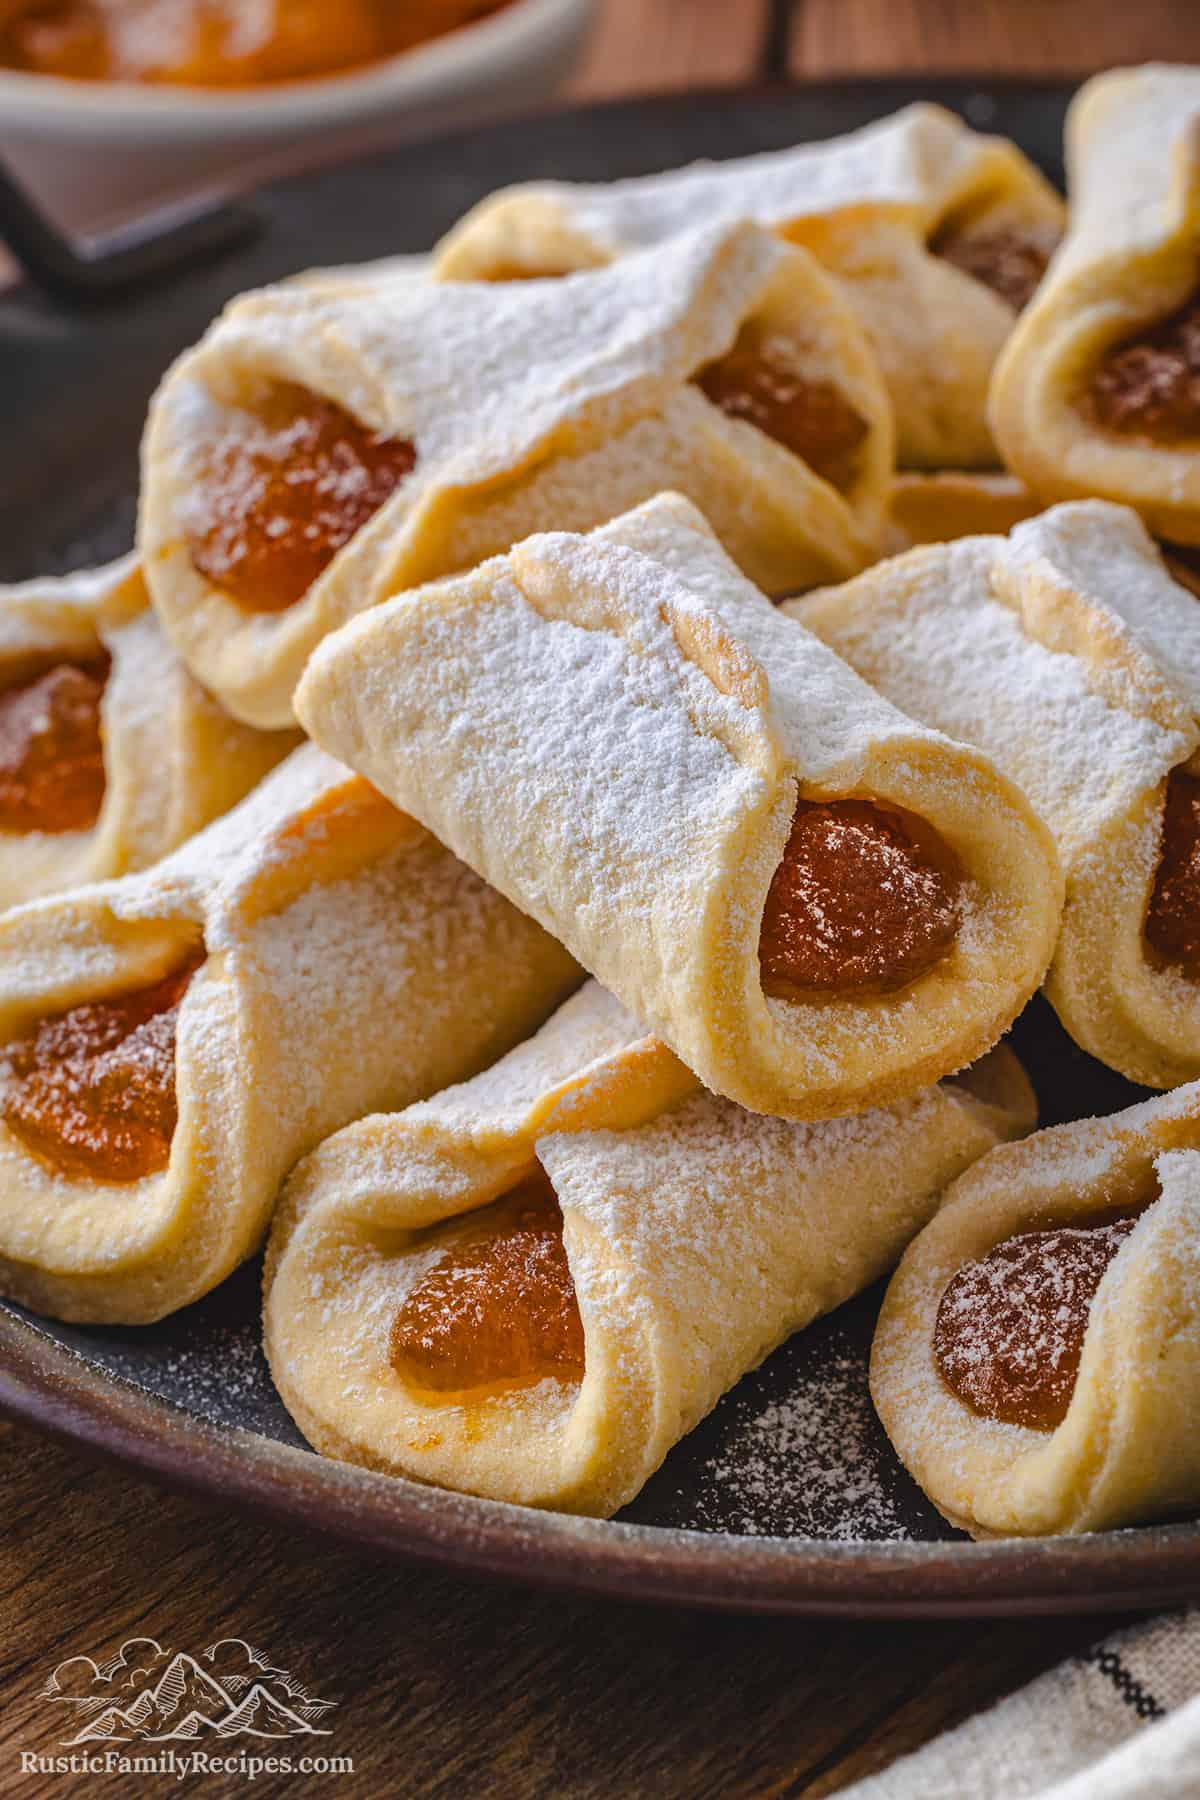 Close up of assorted pizzicati cookies filled with jam and dusted with powdered sugar on a dark plate.